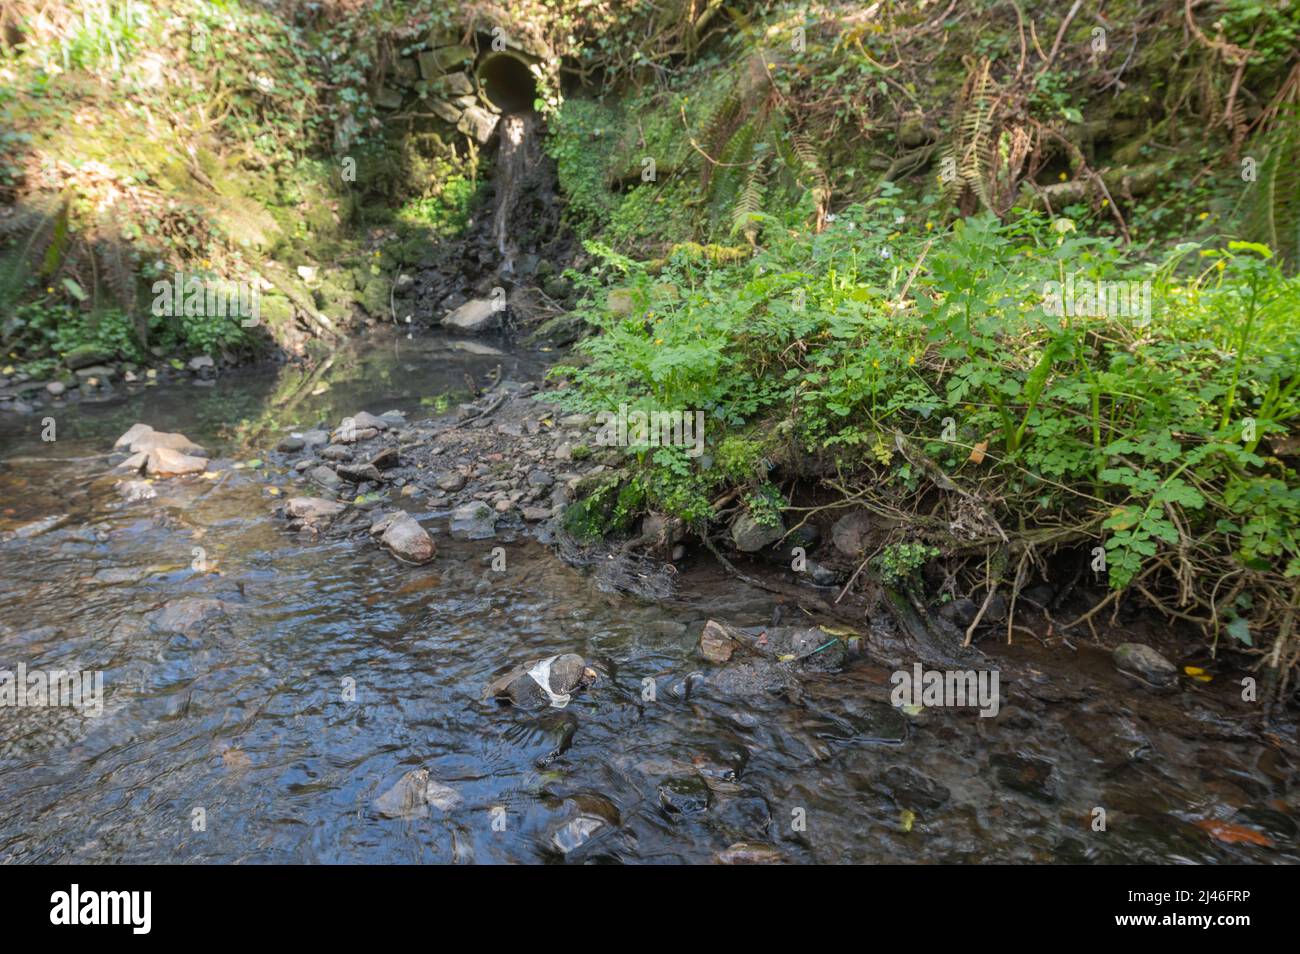 Pollution from outfall pipe discharging untreated sewage into a tributary of the Gwendraeth Fawr, Trimsaran, Carmarthenshire, Wales, UK. Streambed is Stock Photo